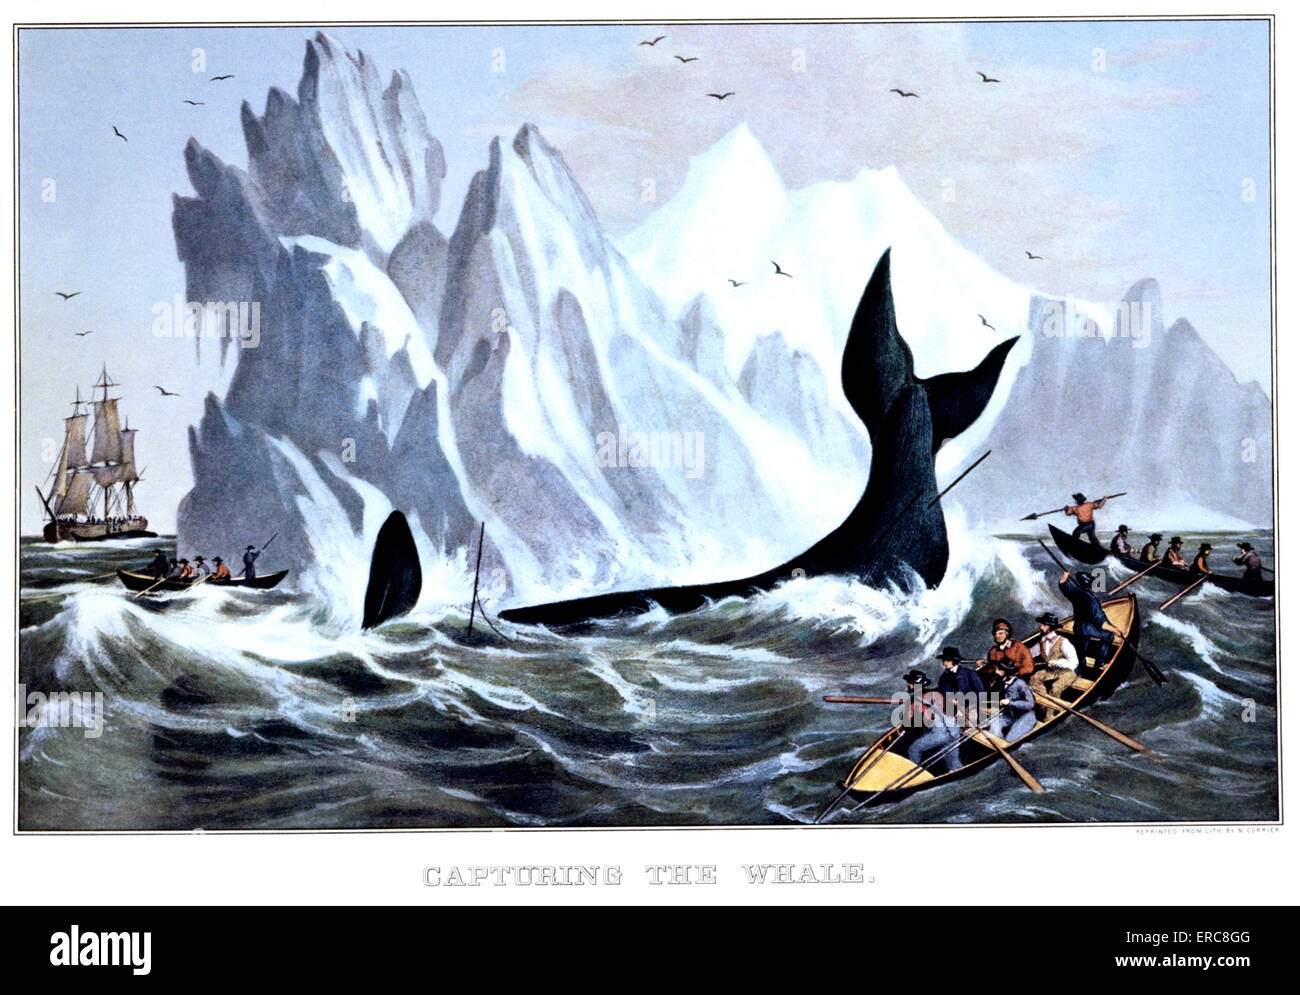 1850s CAPTURING THE WHALE - CURRIER & IVES LITHOGRAPH - 1850 Stock Photo